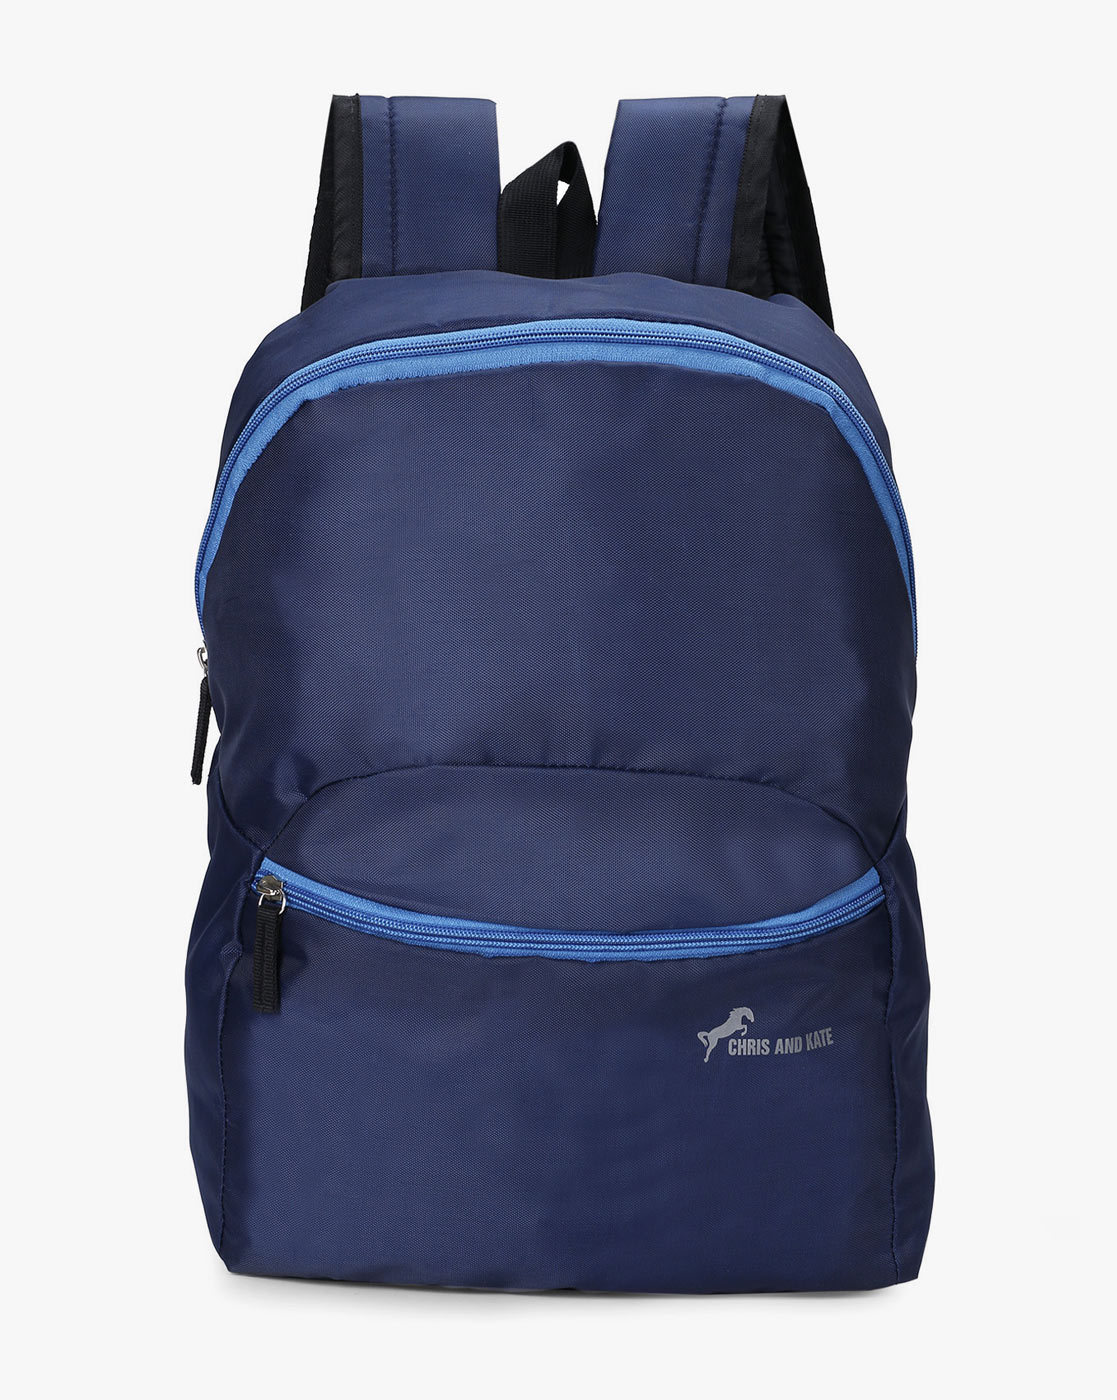 Chris & Kate Backpack with Adjustable Straps